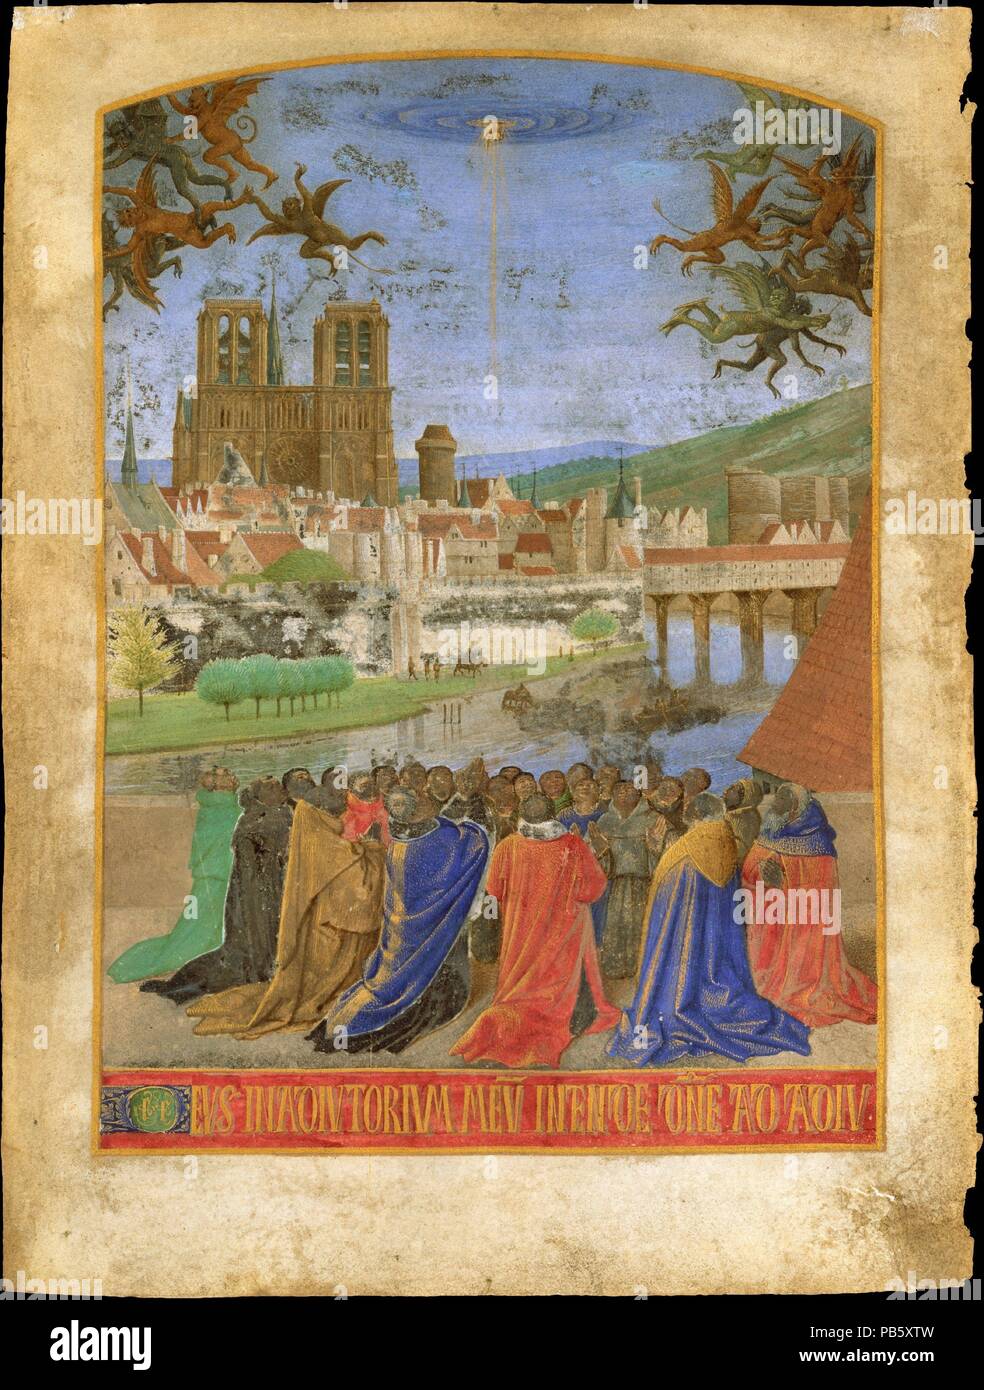 The Right Hand of God Protecting the Faithful against the Demons. Artist: Jean Fouquet (French, Tours ca. 1425-ca. 1478 Tours). Dimensions: leaf: 7 5/8 x 5 3/4 in.  (19.4 x 14.6 cm). Date: ca. 1452-1460.  The 'Hours of Étienne Chevalier' is one of the most famous and lavishly illuminated manuscripts of the fifteenth century. It was painted for the treasurer of France by Jean Fouquet, court artist to kings Charles VII and Louis XI, who worked not only as a miniaturist but also as a panel painter. The Lehman miniature decorates the page that contains the opening words of the evening prayer (vesp Stock Photo